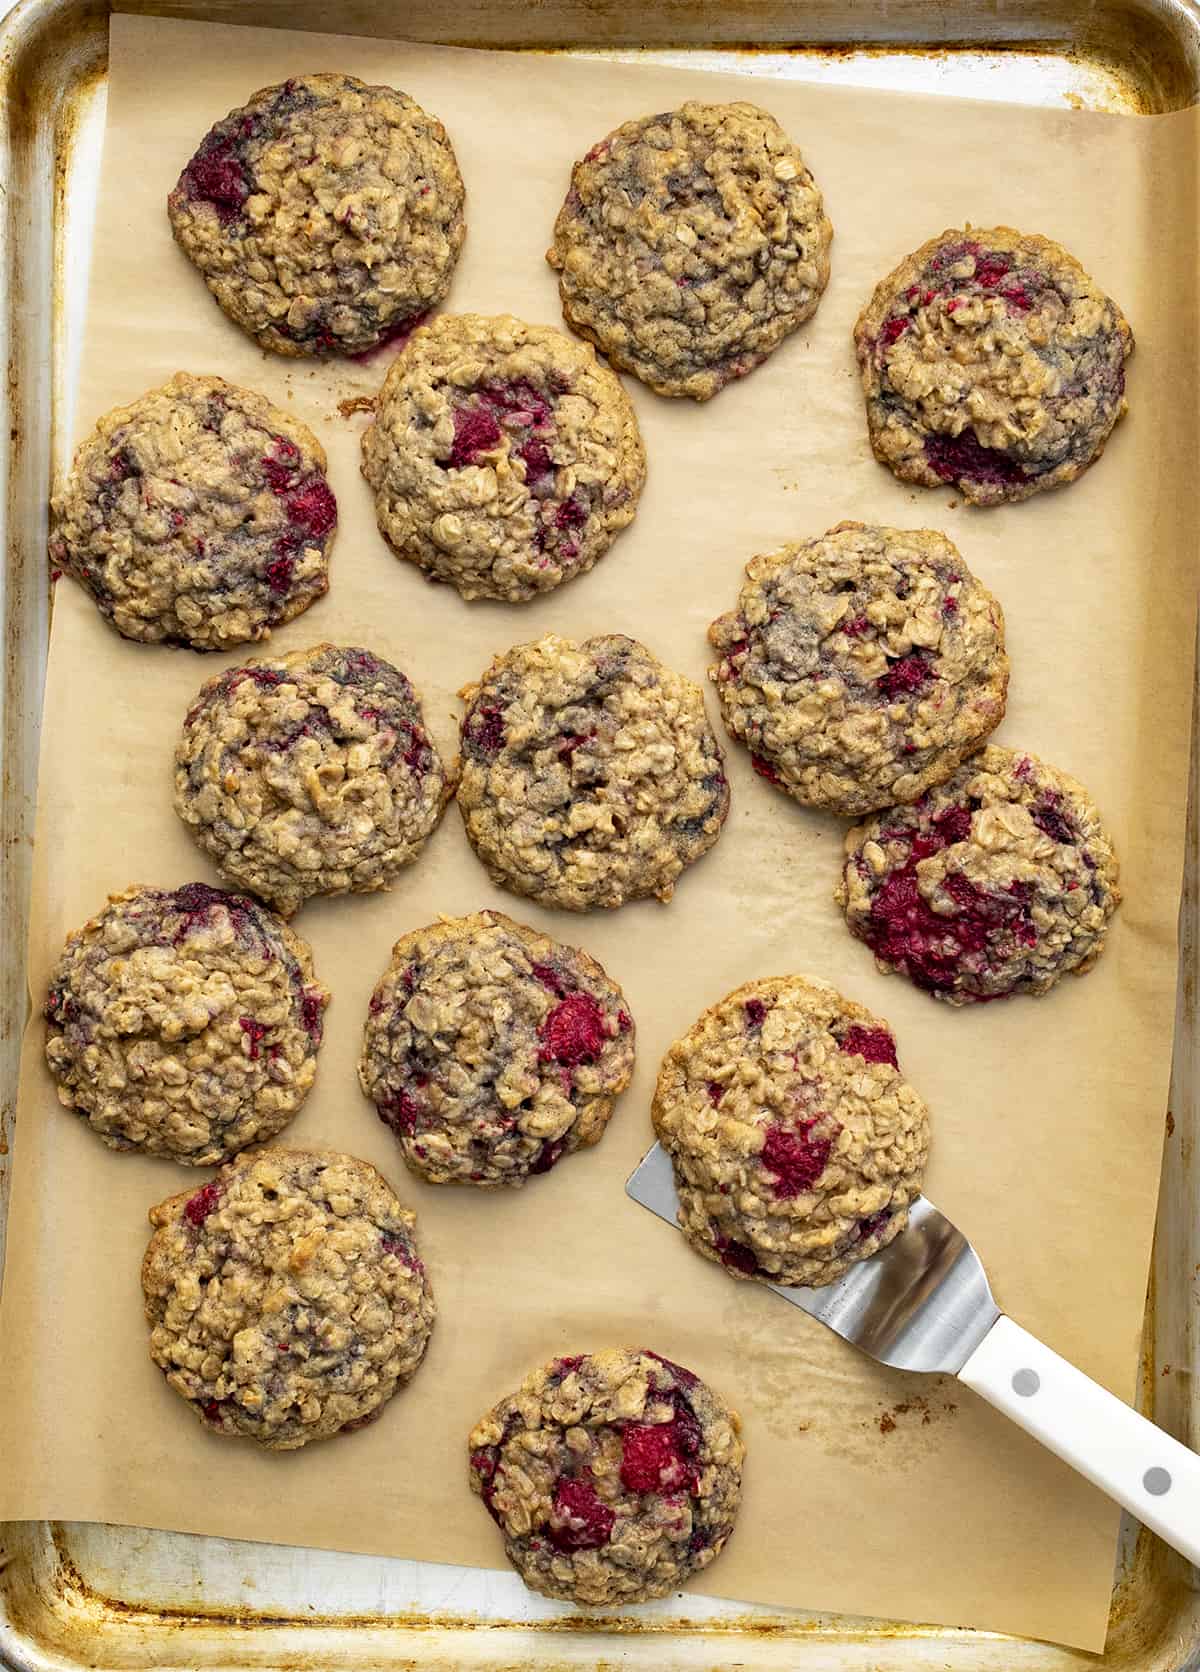 Pan of Raspberry Oatmeal Cookies Hot out Of The Oven. Cookies, Baking, Raspberry Cookies, Raspberry Oatmeal Cookies, Cookie Recipes, Cookie Exchange, Fruit Cookies, Summer Baking, Healthier Cookie Recipes, Dessert, i am baker, iambaker